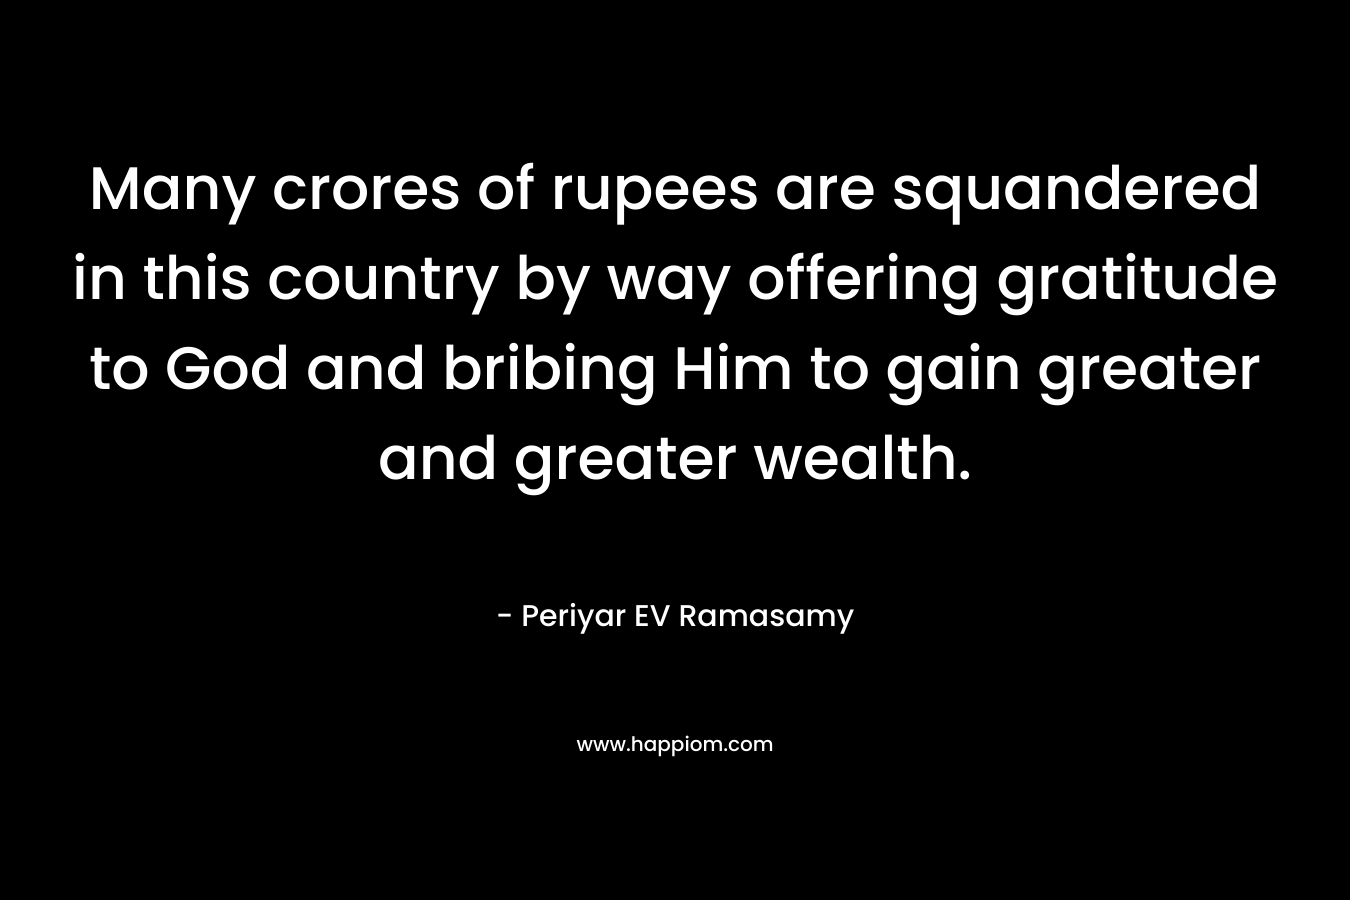 Many crores of rupees are squandered in this country by way offering gratitude to God and bribing Him to gain greater and greater wealth.